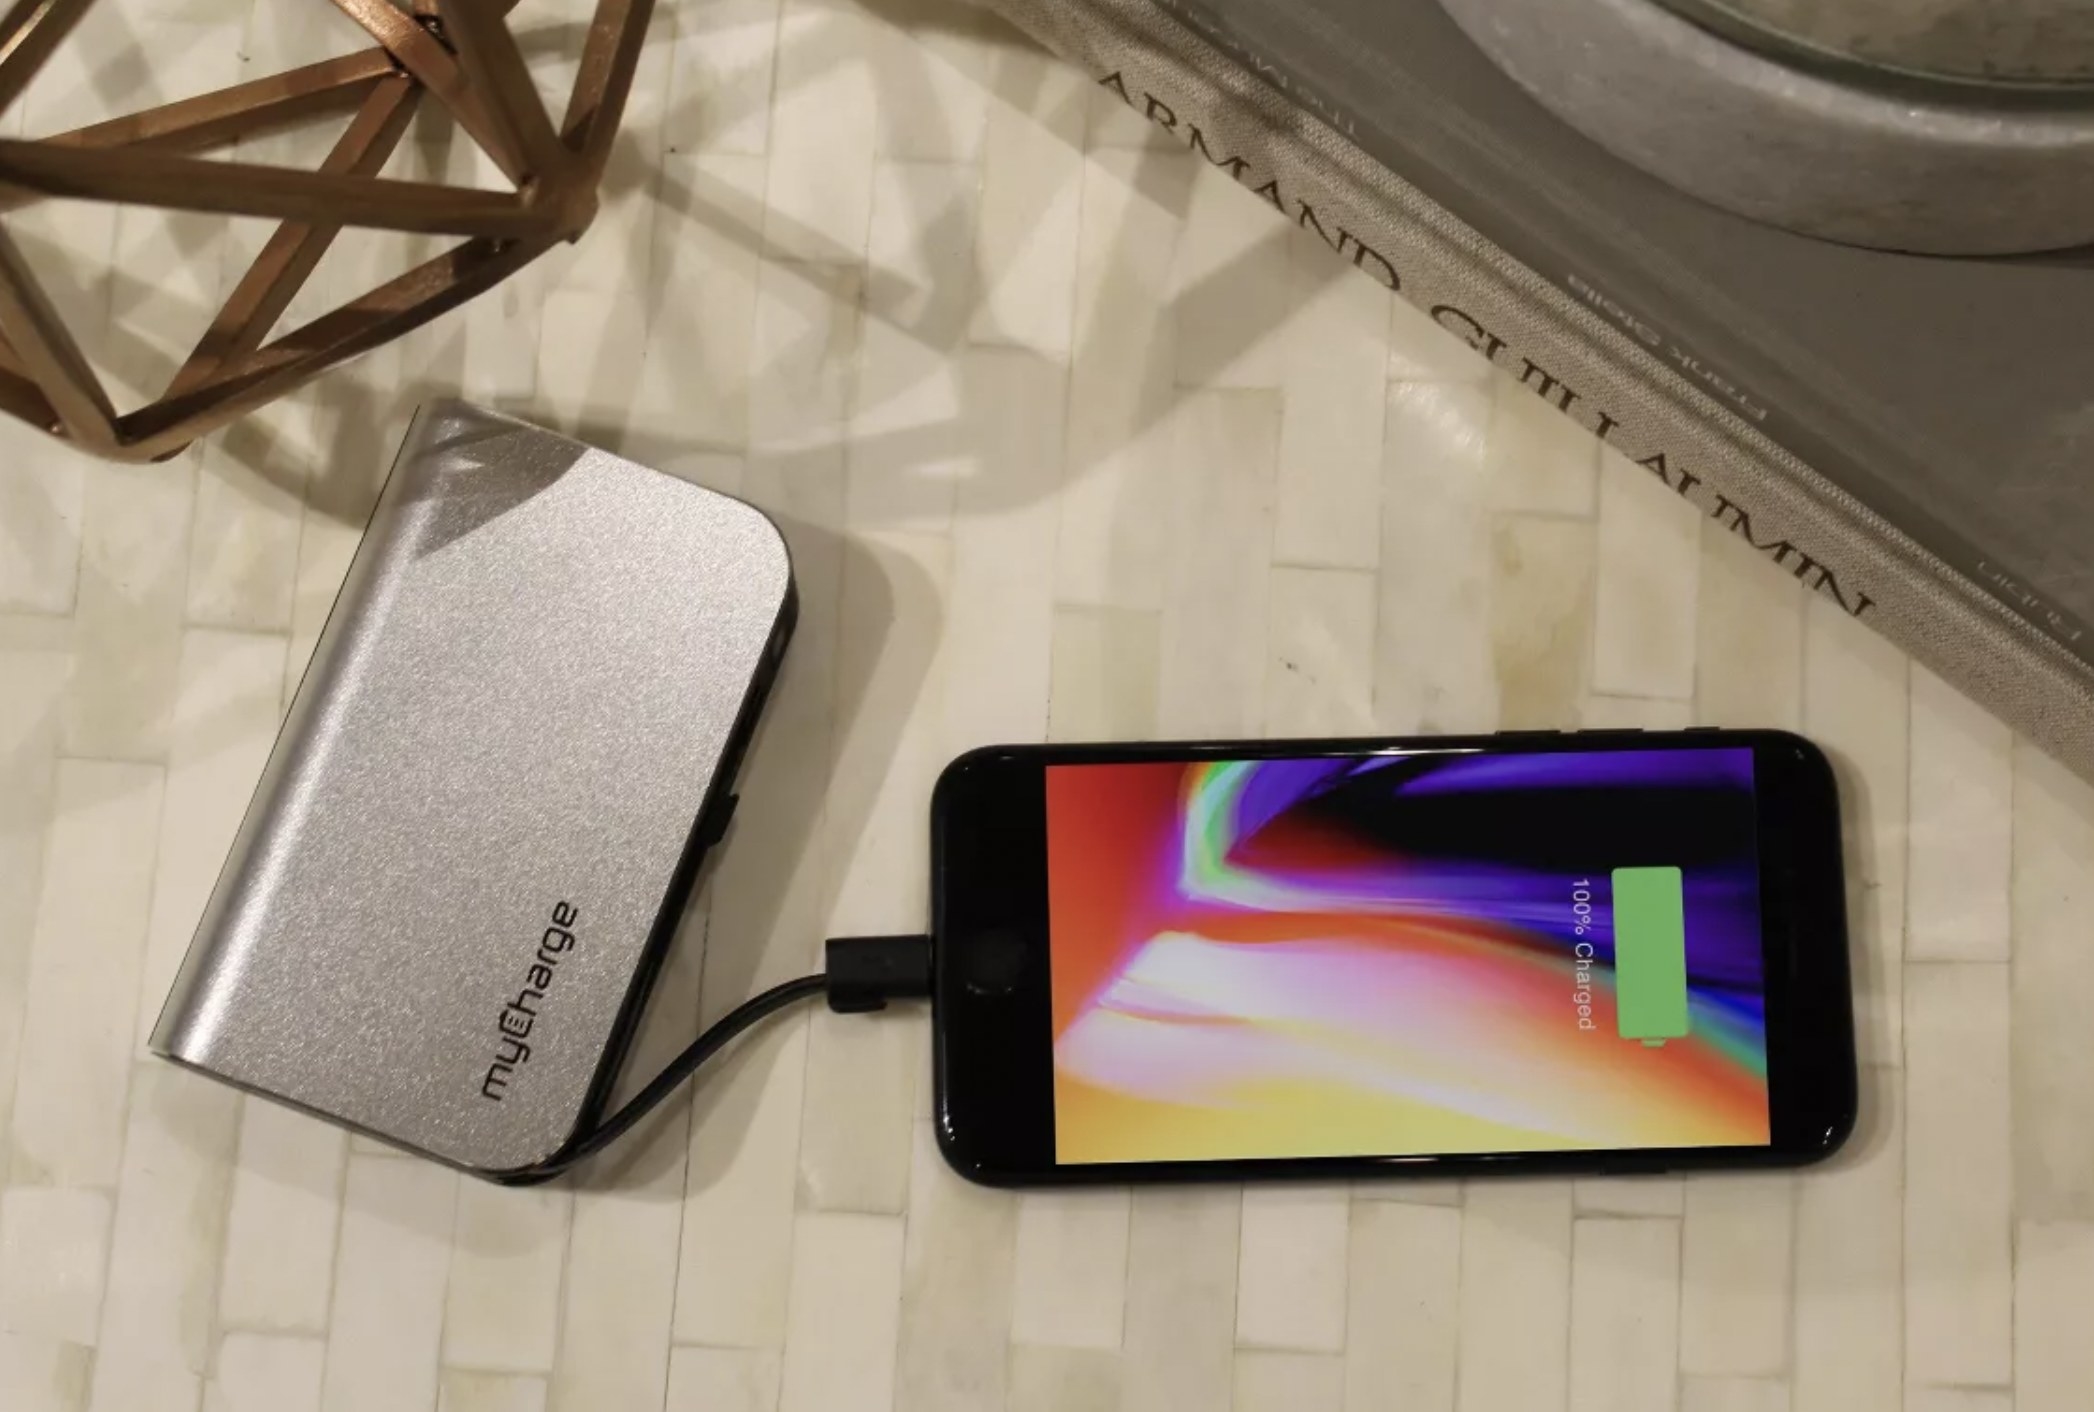 the power bank charging a phone